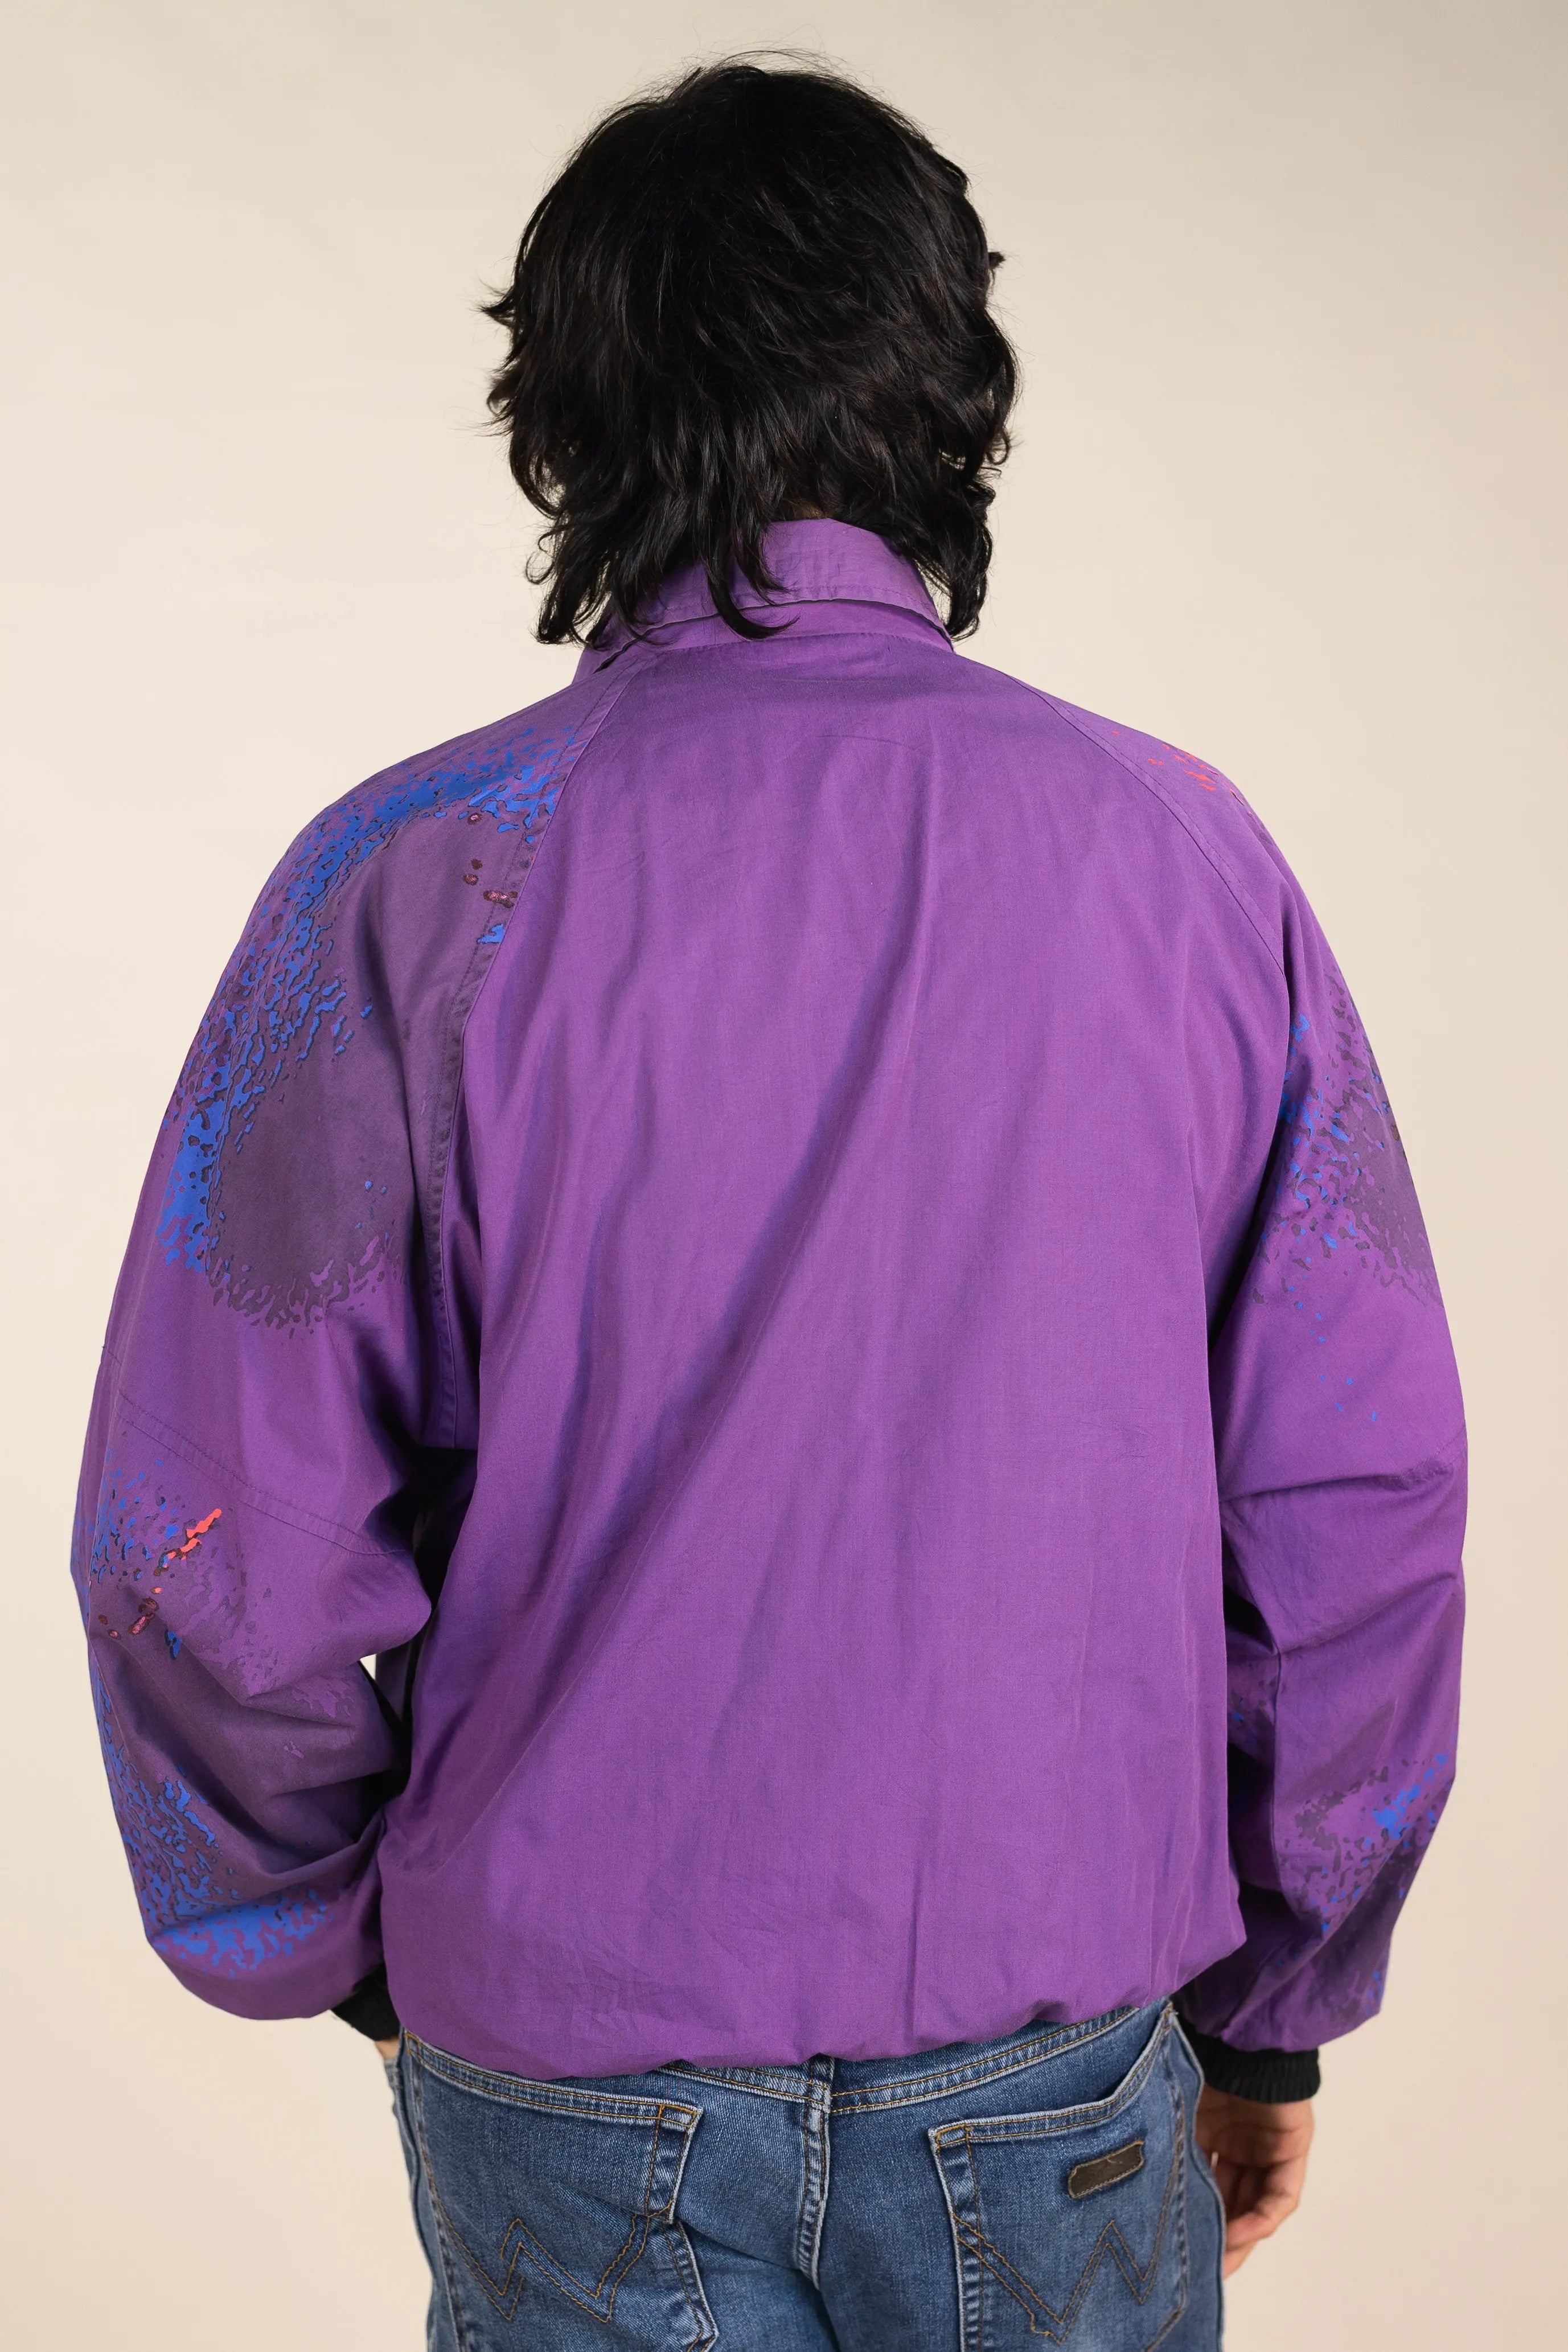 Club Med - 90s Track Jacket- ThriftTale.com - Vintage and second handclothing